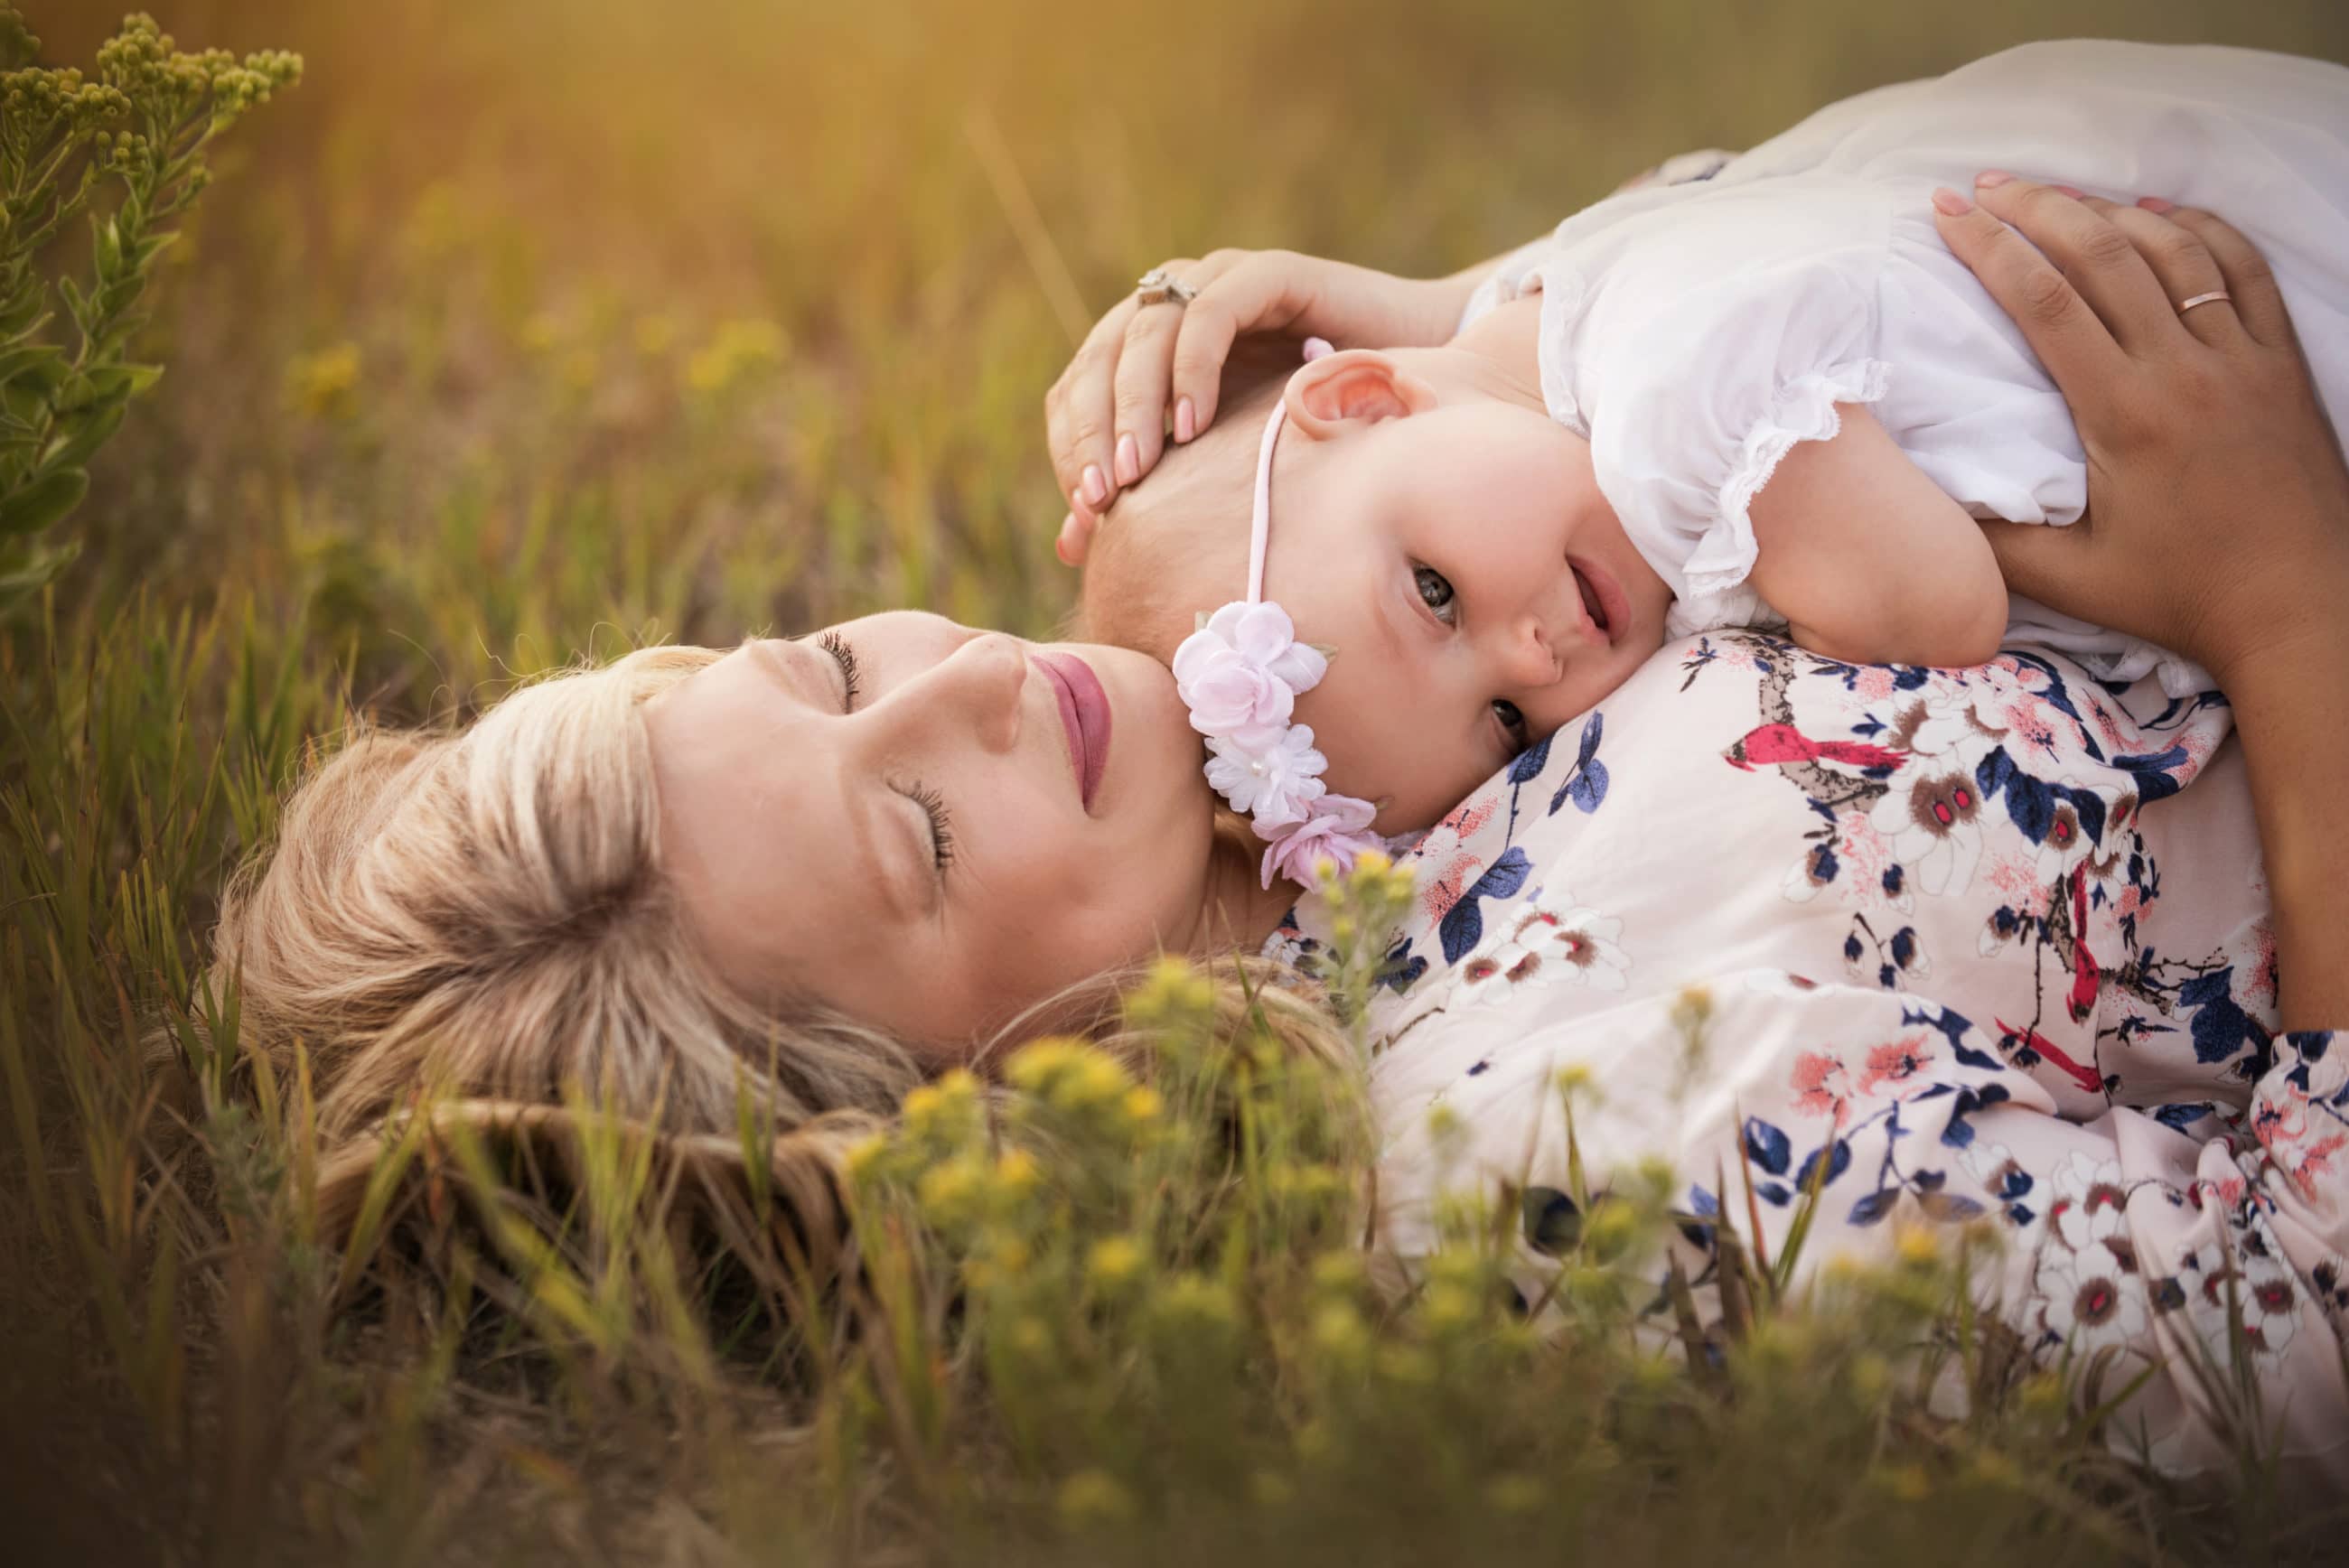 mother holding her baby girl laying on her back in a field of yellow flowers - Denver photographer